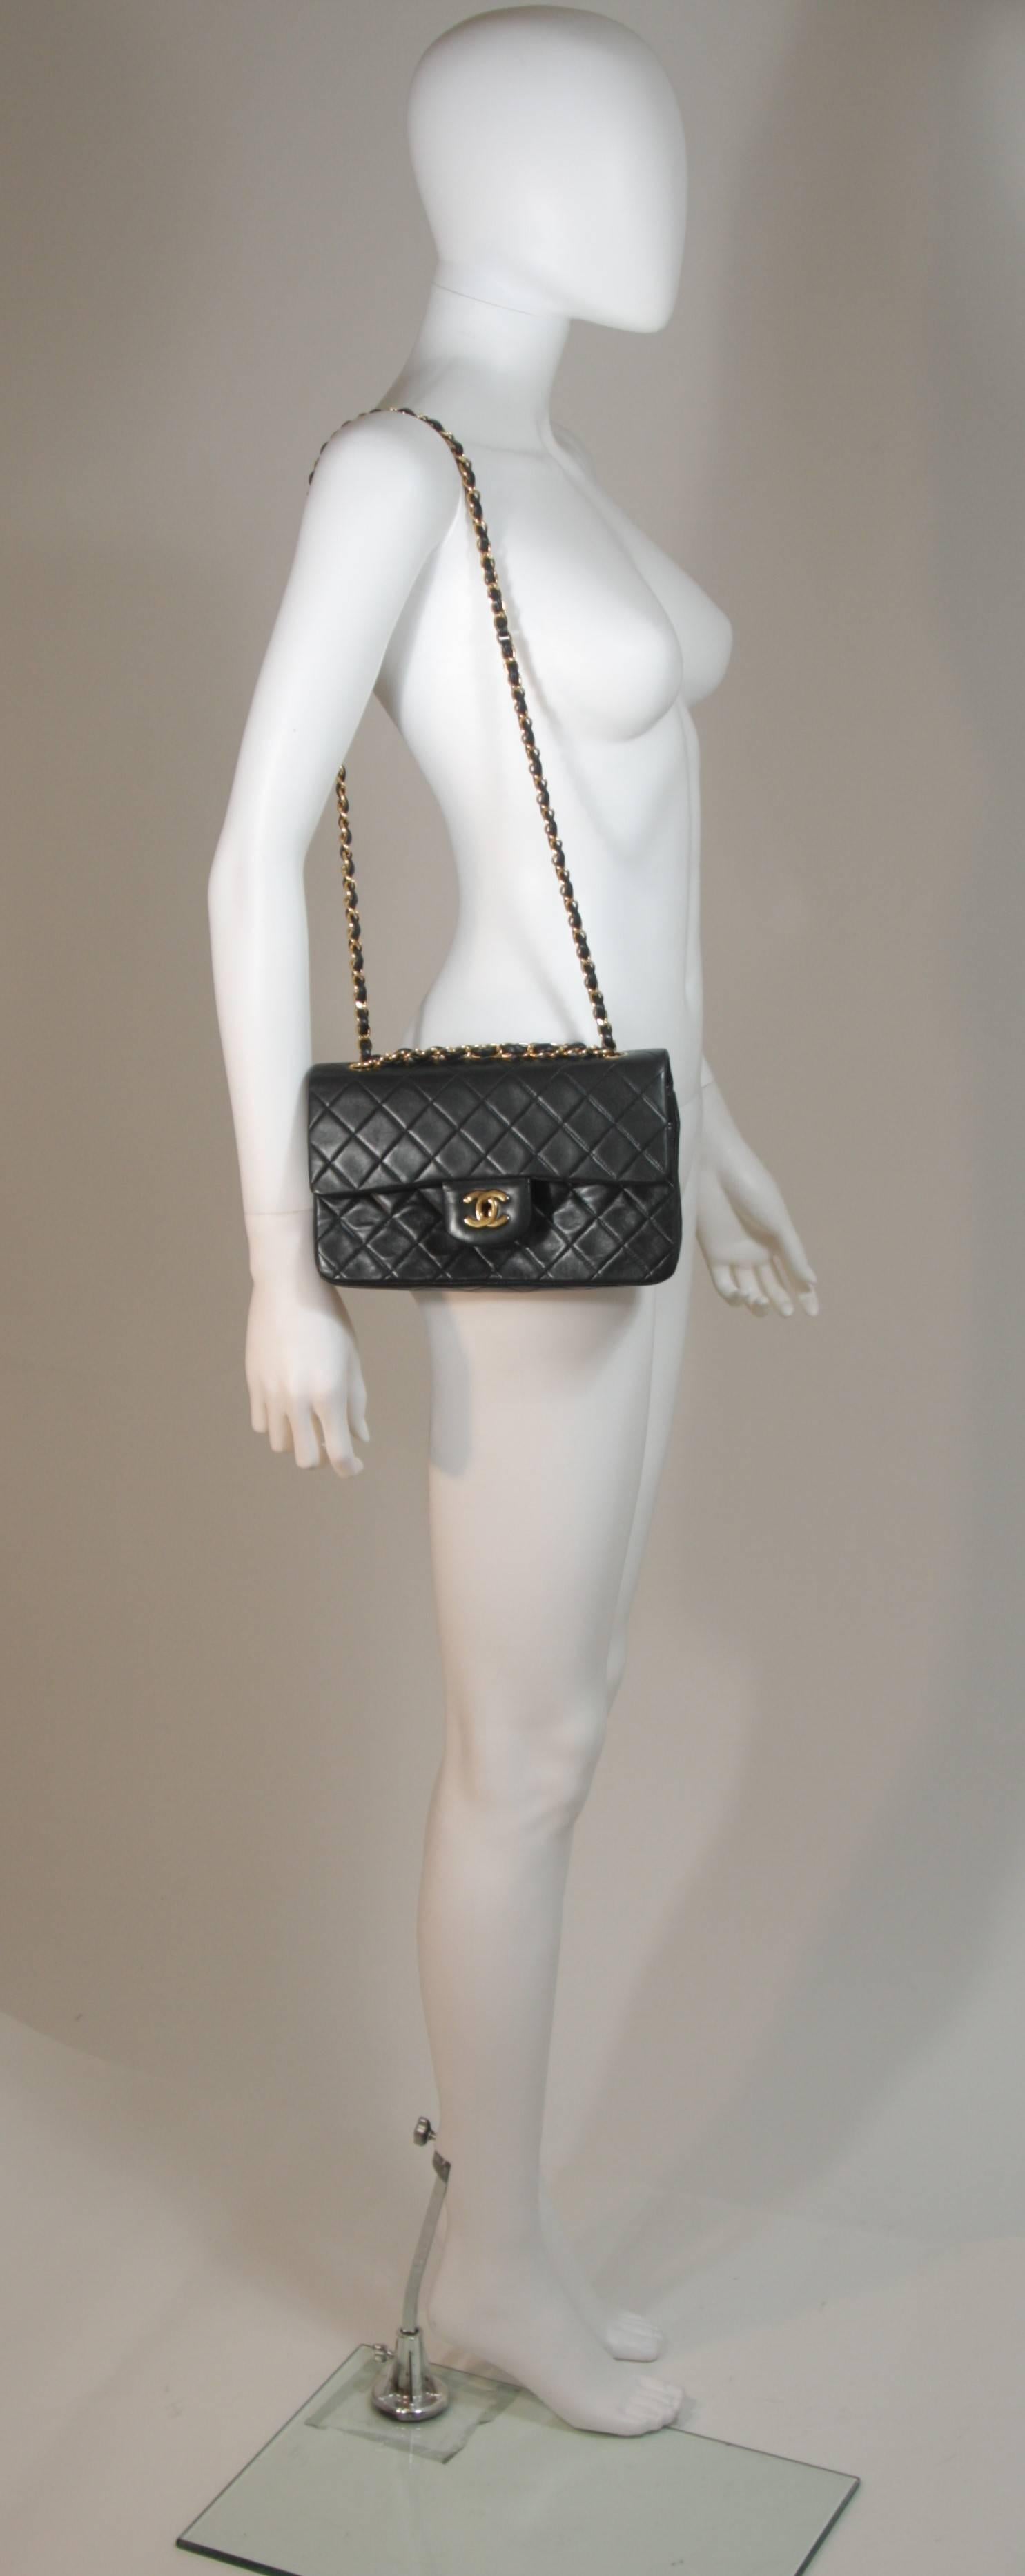 date code chanel bag